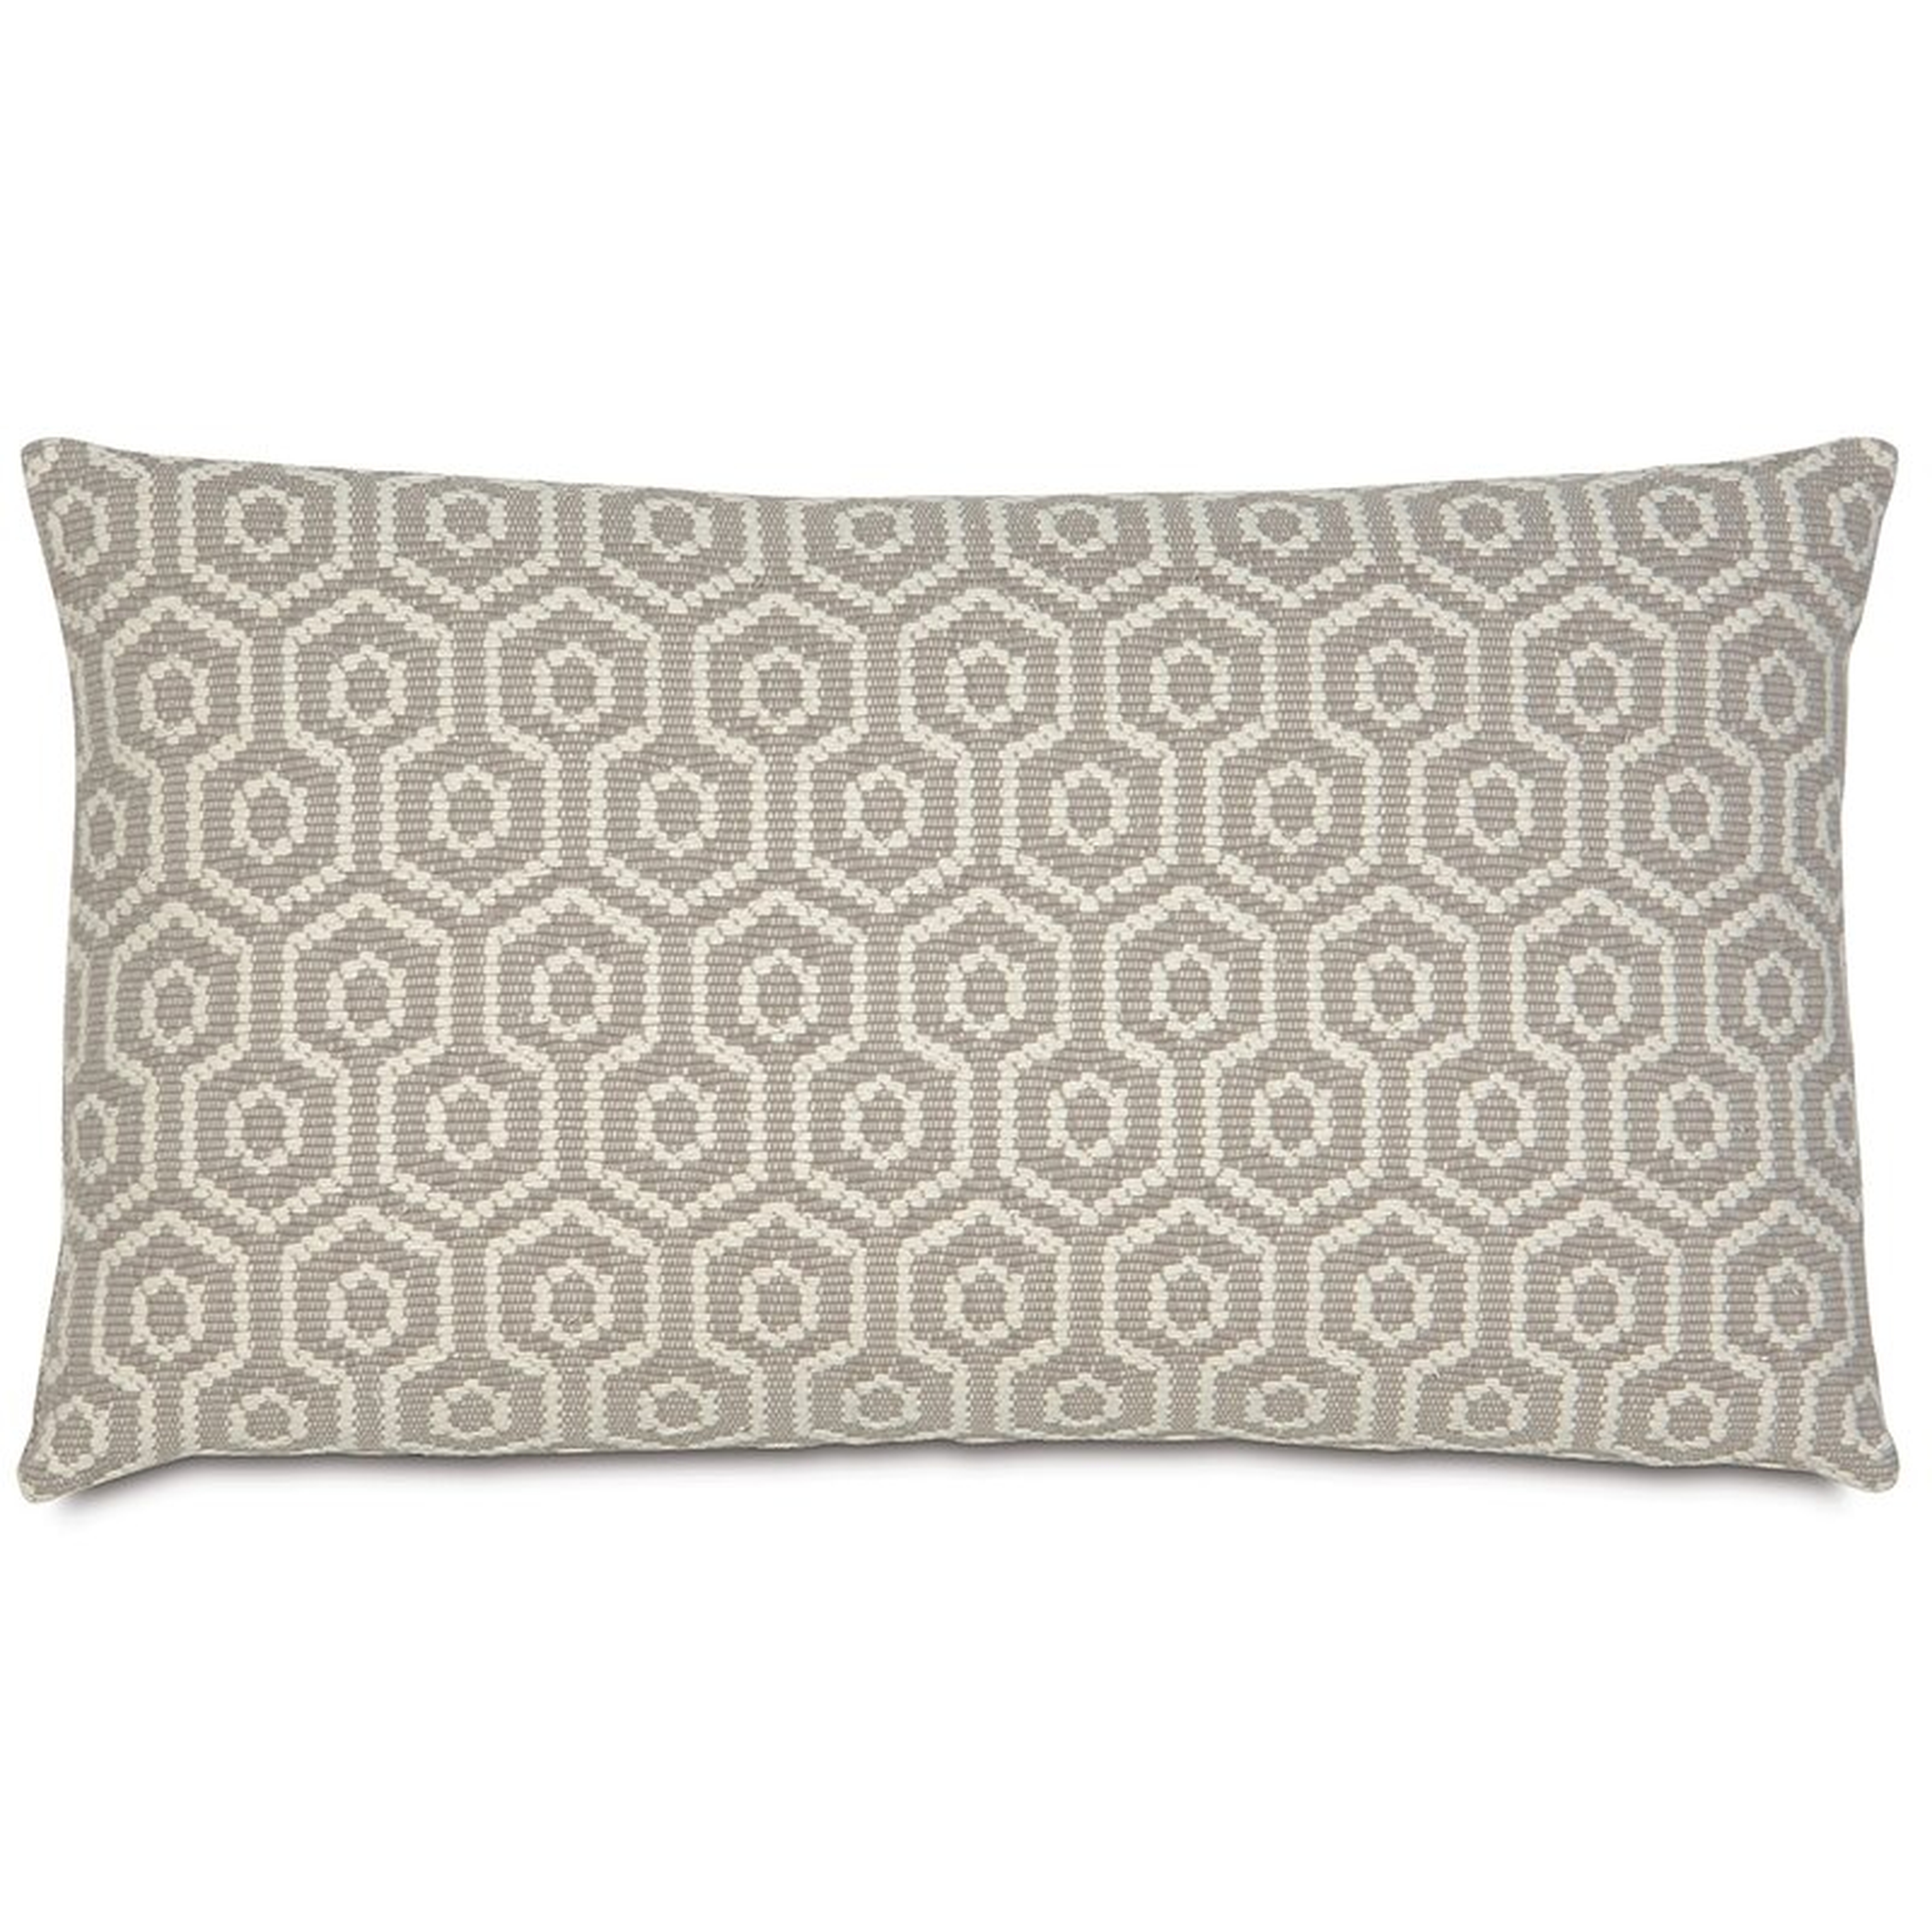 Eastern Accents Gavin Smoke Pillow Cover & Insert - Perigold